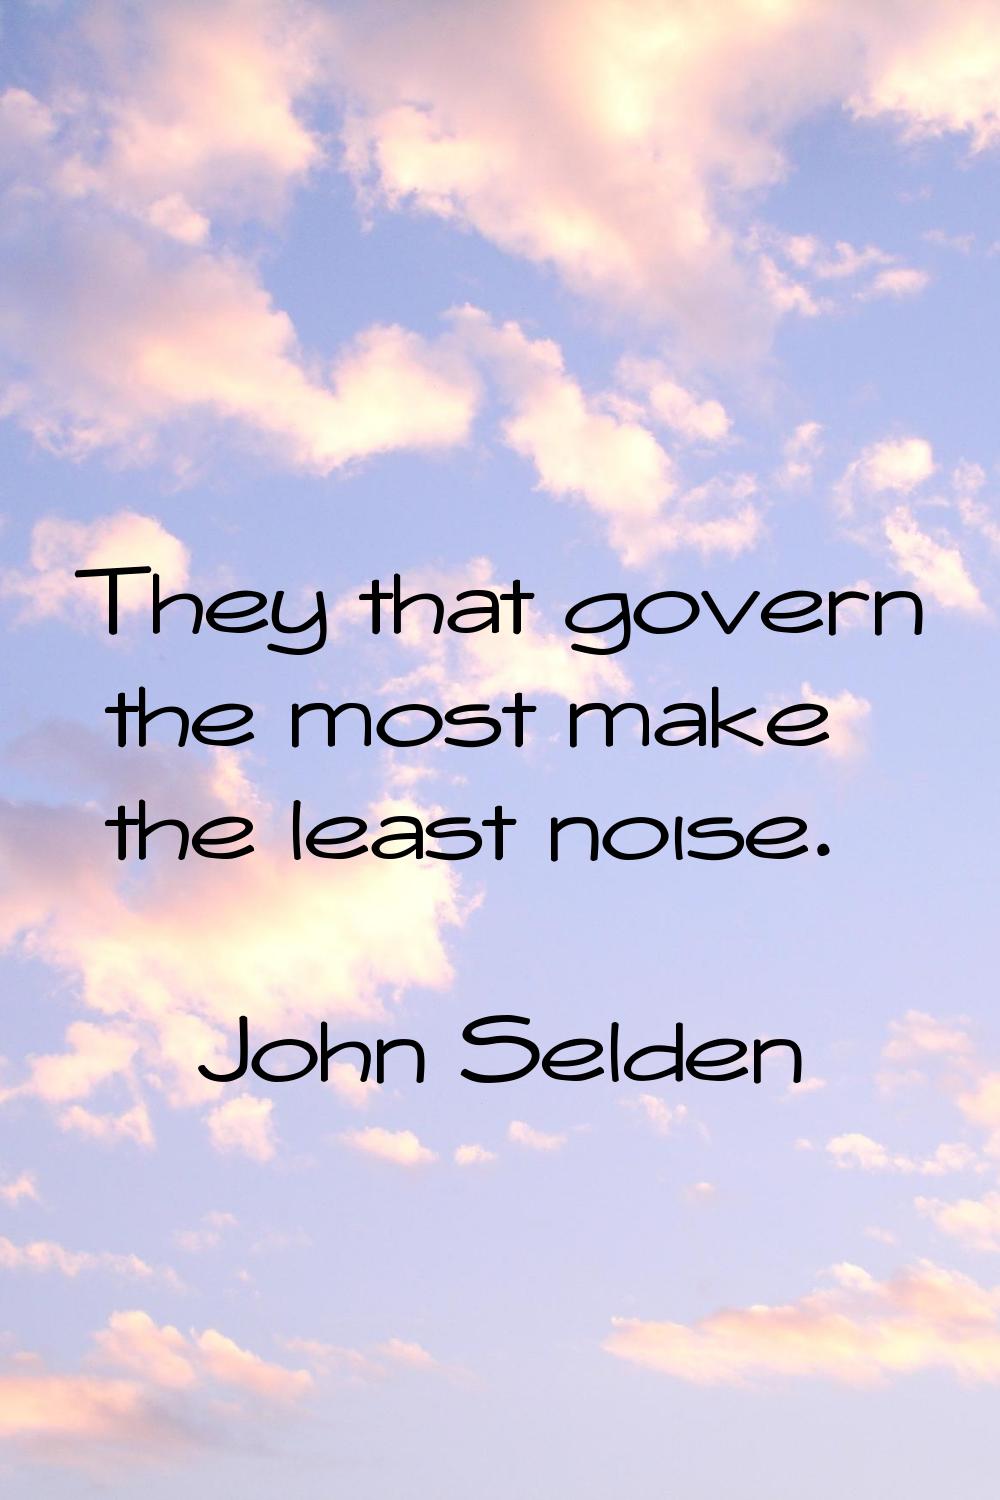 They that govern the most make the least noise.